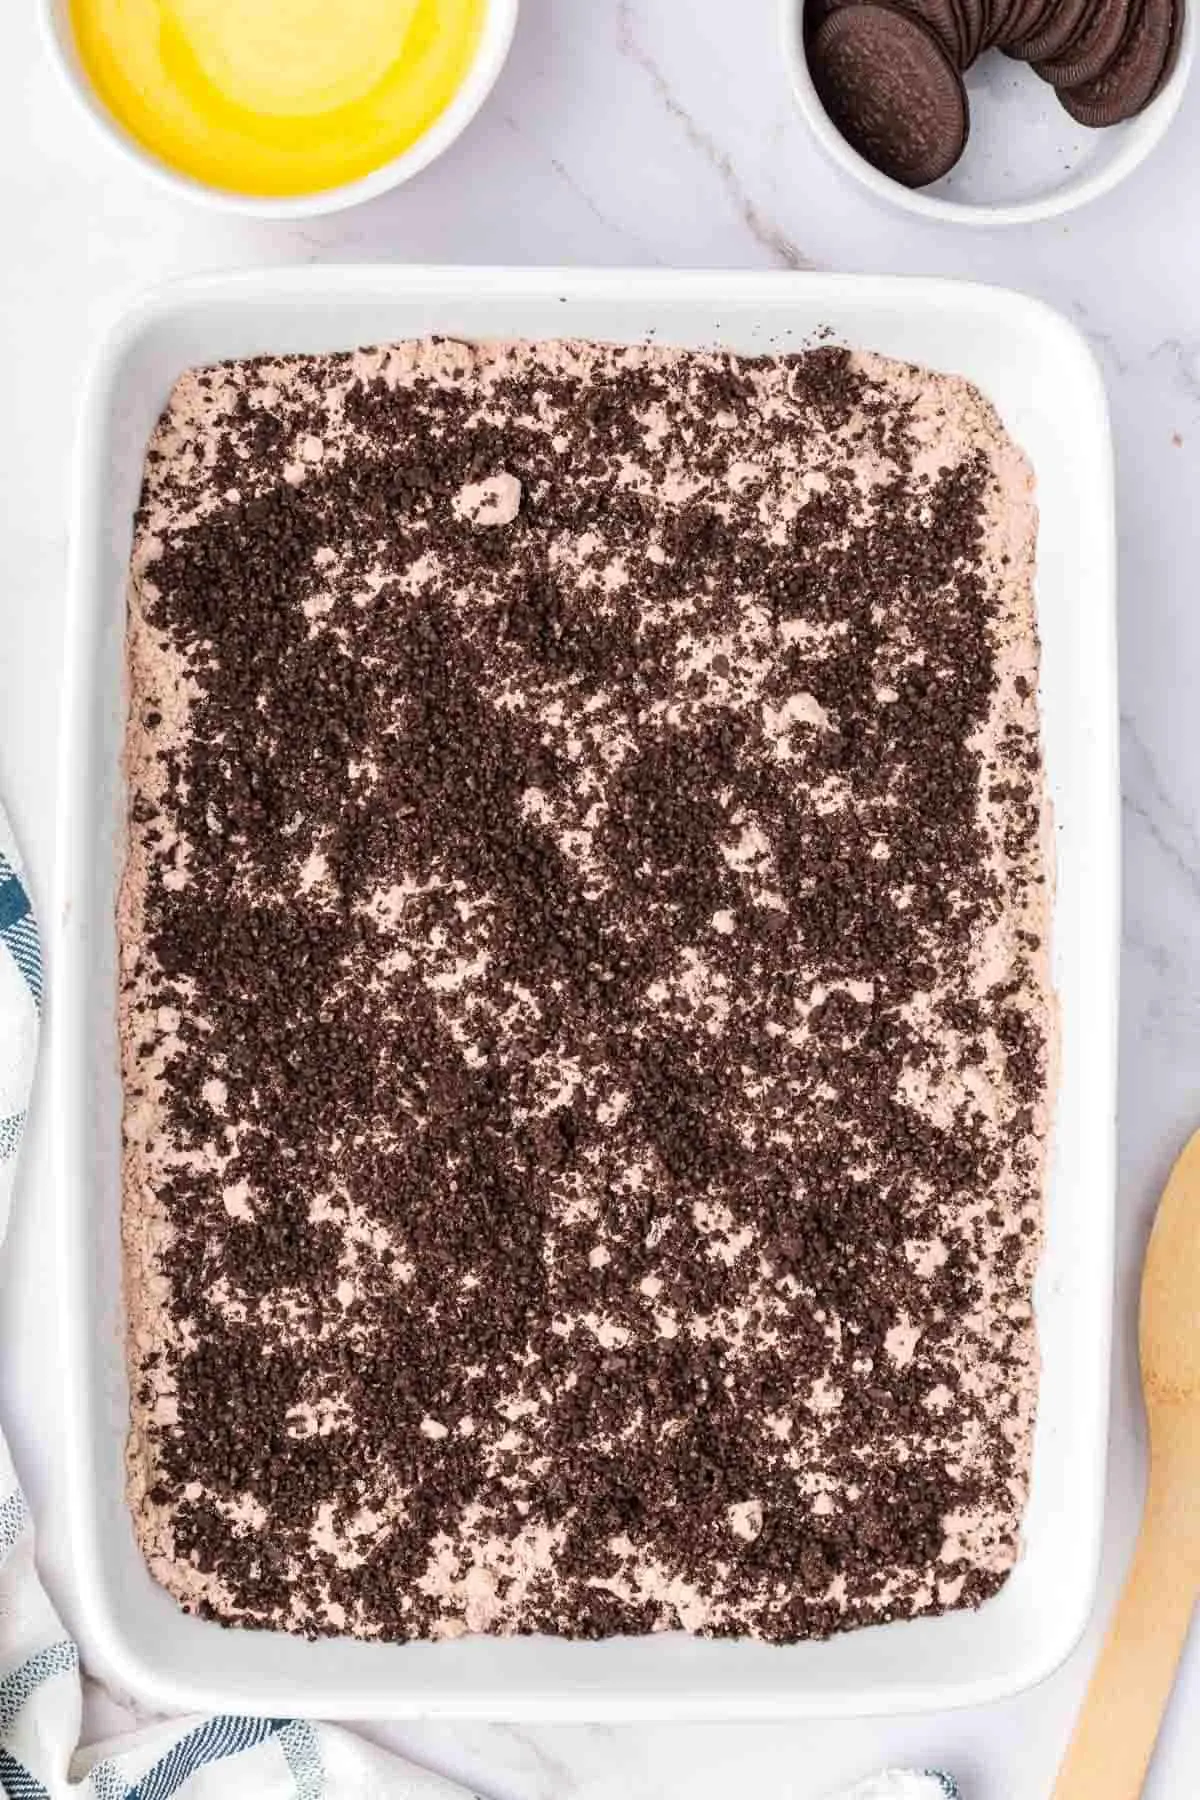 Oreo cookie crumbs over Devils food cake mix in a baking dish